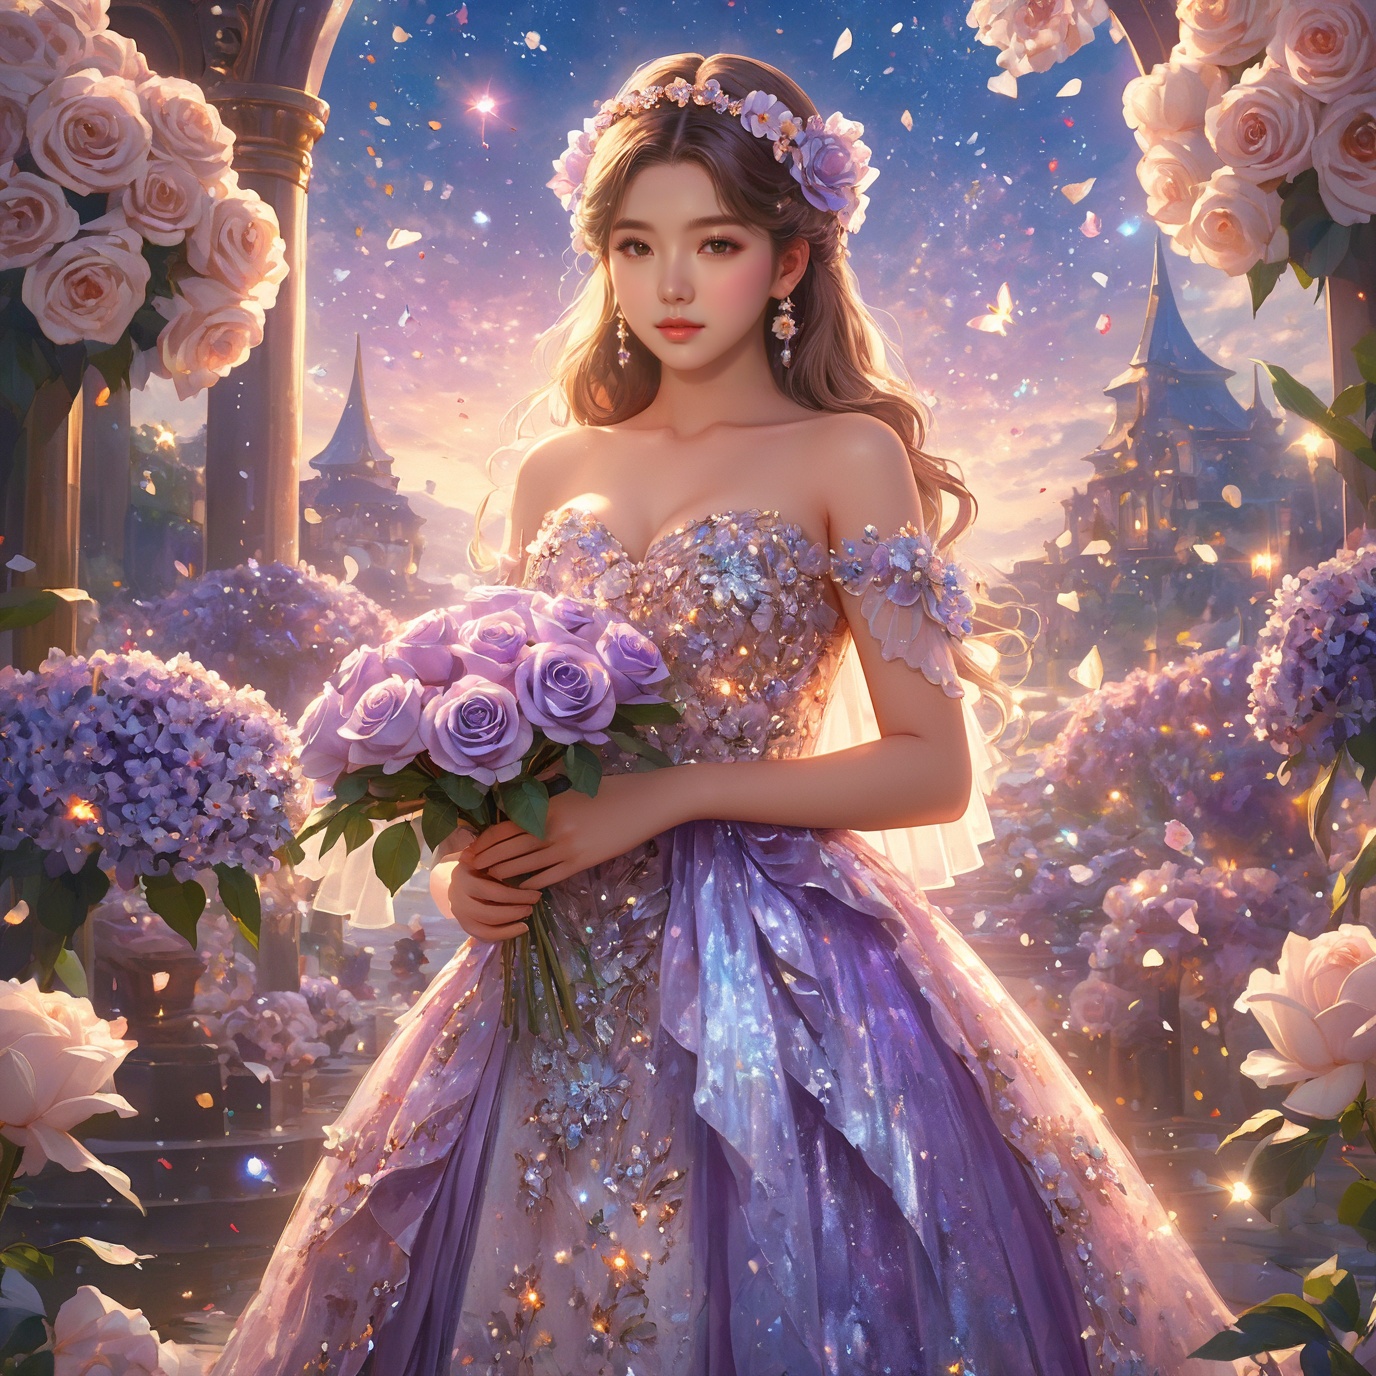 masterpiece, 1 girl, Lolita, Young girl, Asian girl, Lovely, A beautiful face, Look at me, Lily flower, Flowers, dress, Holding flowers in hand, sparkling dress, Giant roses, Lilac flower, Giant flowers, Asgard, A fantastic scene, textured skin, super detail, best quality